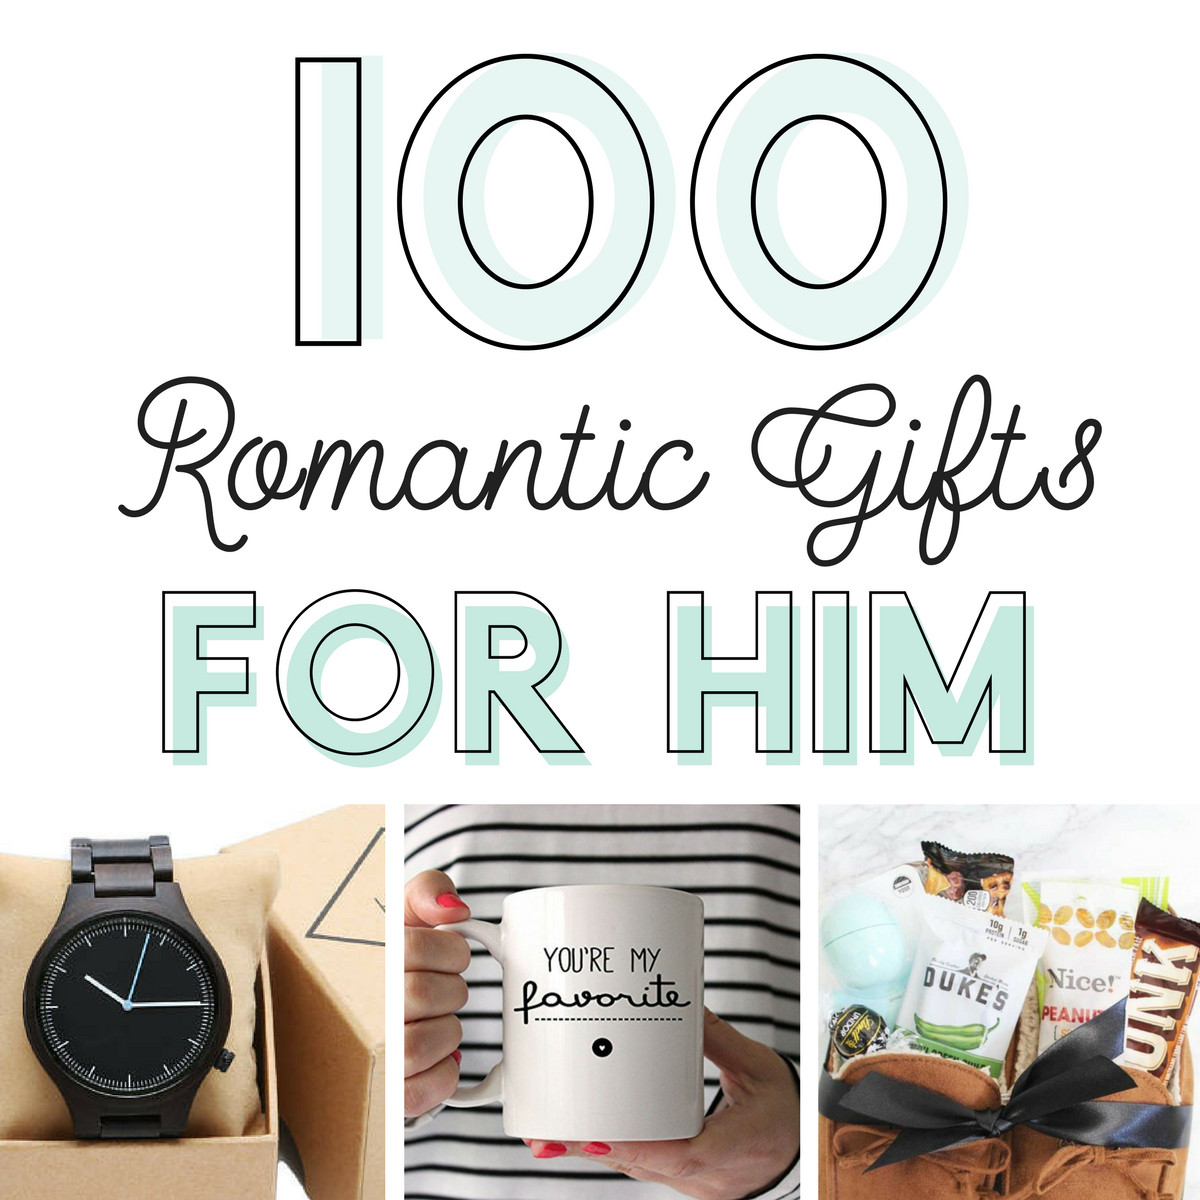 Romantic Gift Ideas Boyfriends
 100 Romantic Gifts for Him From The Dating Divas